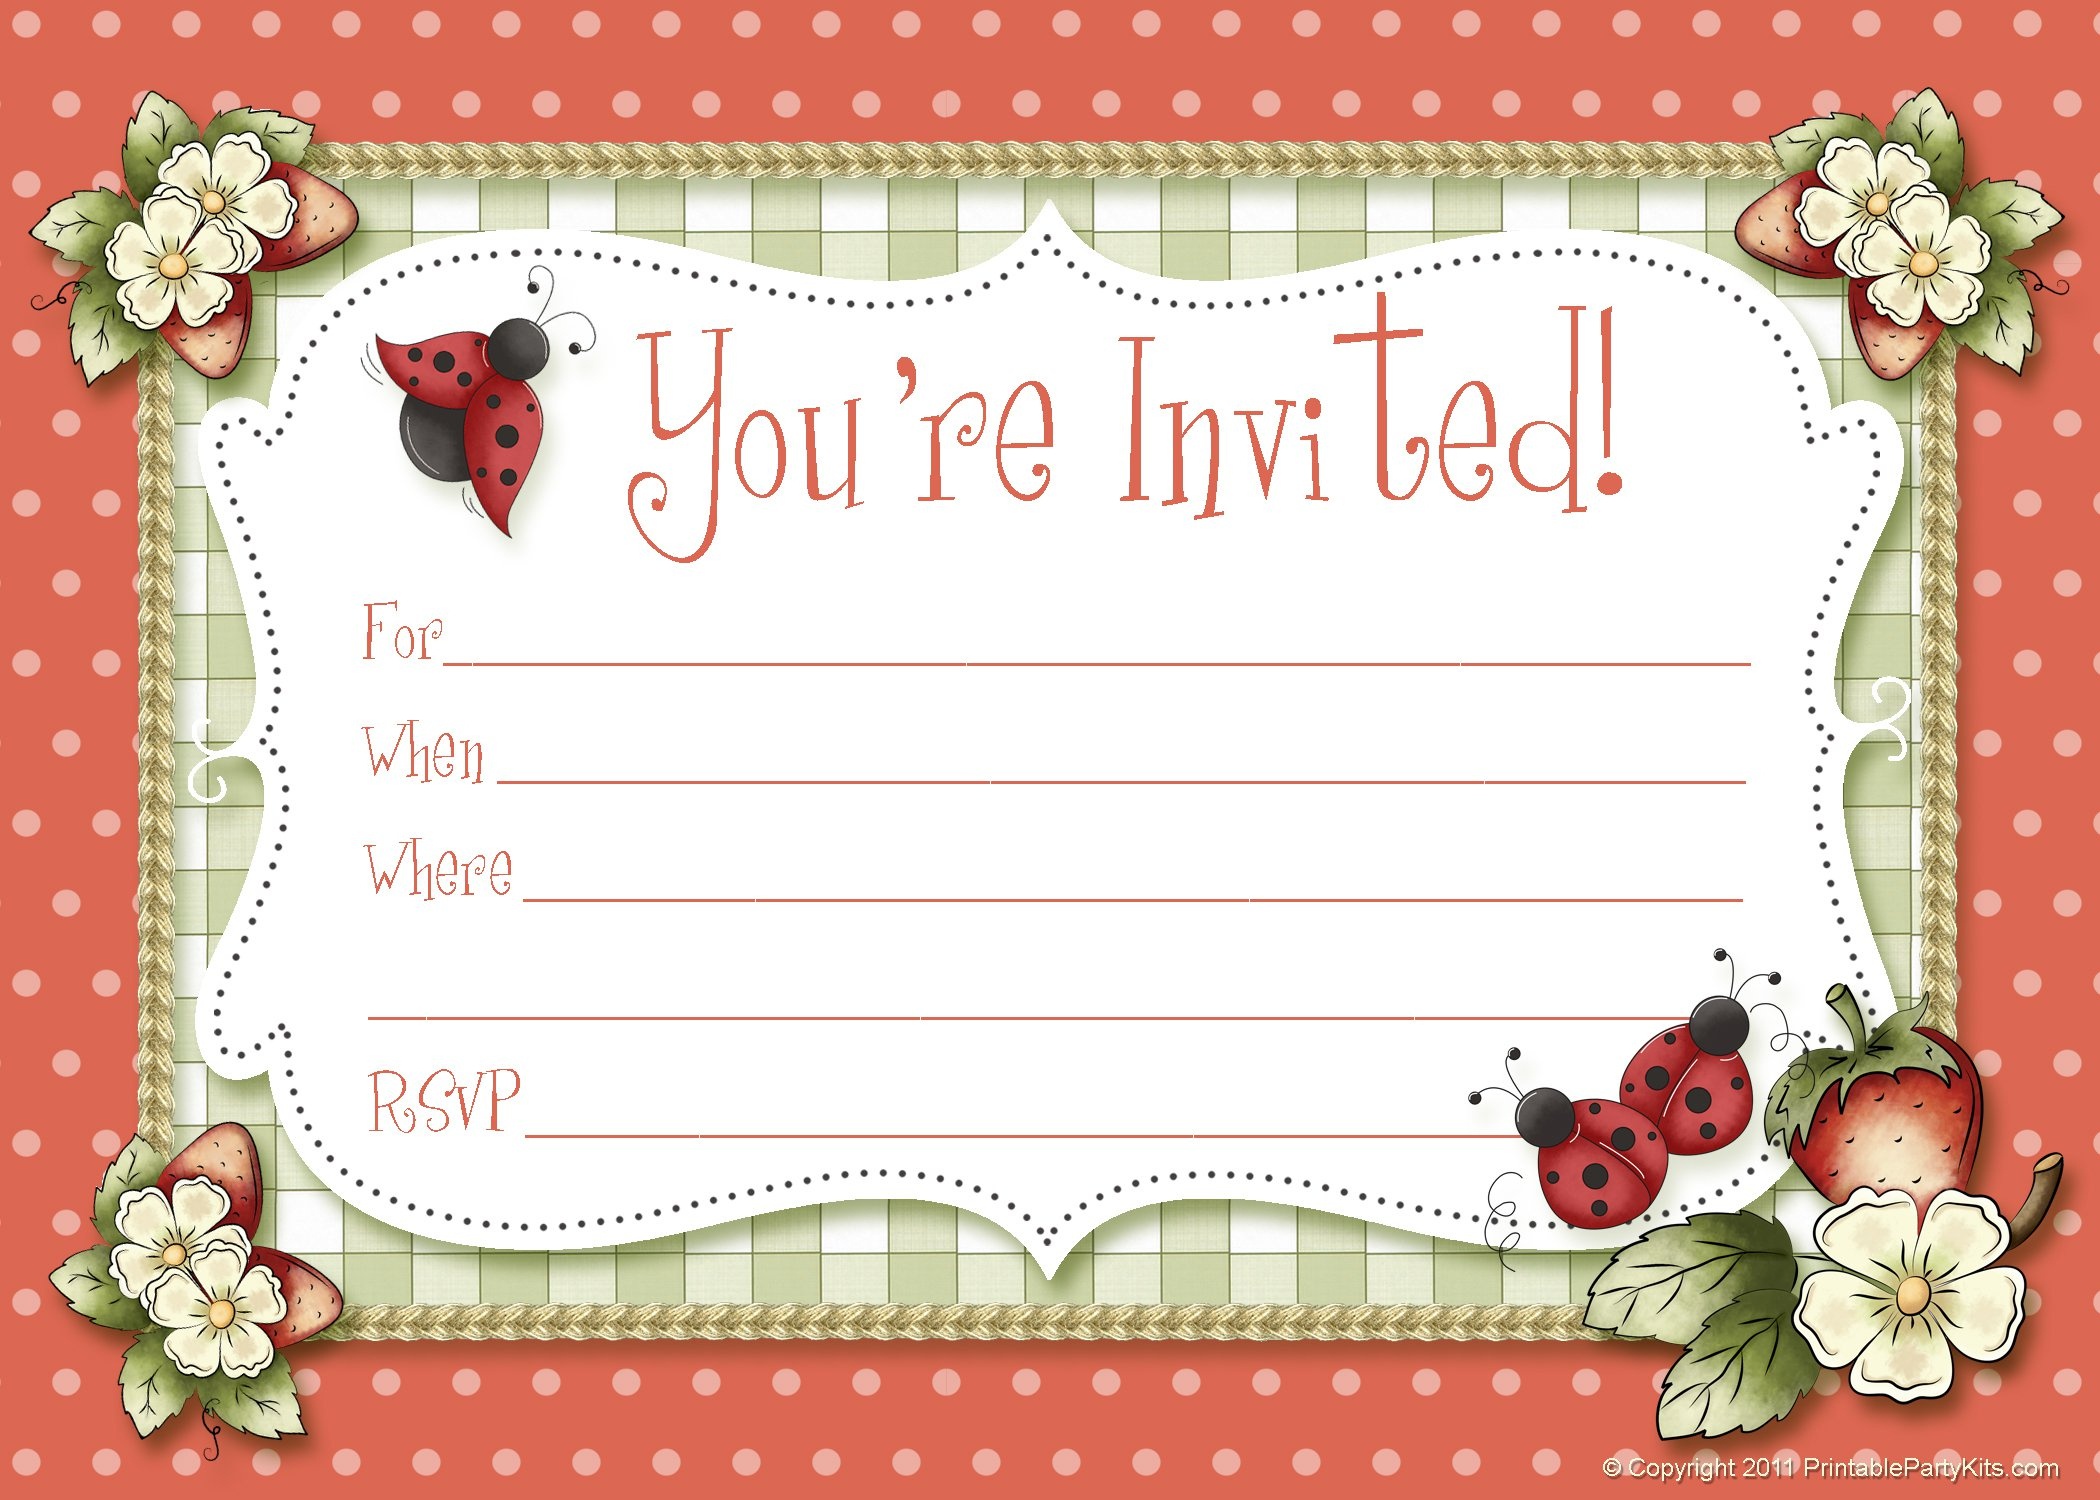 Free Invitation Card Maker Printable - Party Invitation Collection - Make Printable Party Invitations Online Free